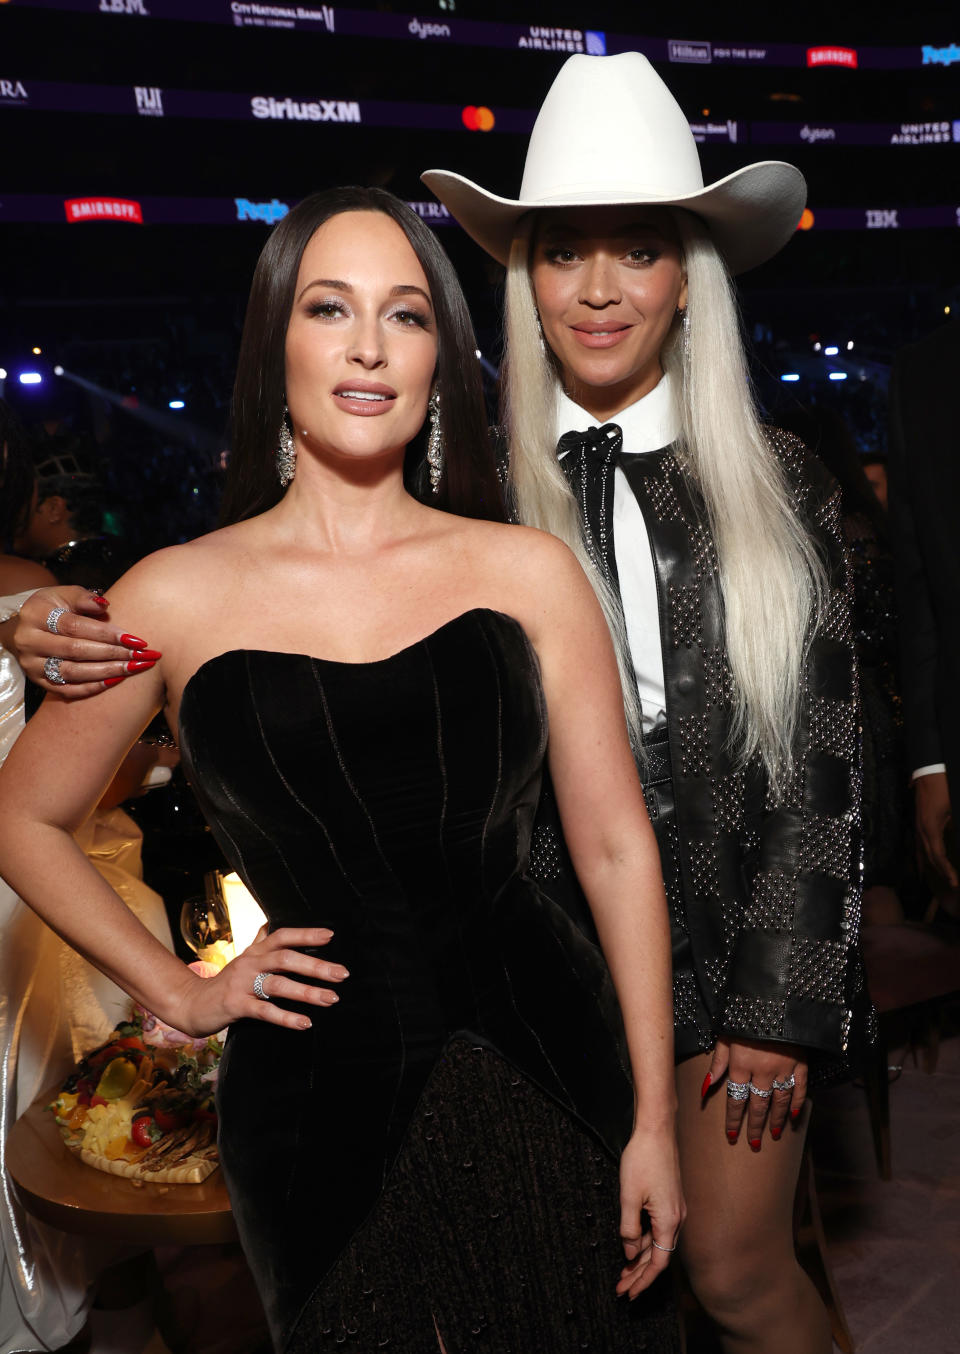 LOS ANGELES, CALIFORNIA - FEBRUARY 04: (L-R) Kacey Musgraves and Beyoncé attend the 66th GRAMMY Awards at Crypto.com Arena on February 04, 2024 in Los Angeles, California. (Photo by Kevin Mazur/Getty Images for The Recording Academy)